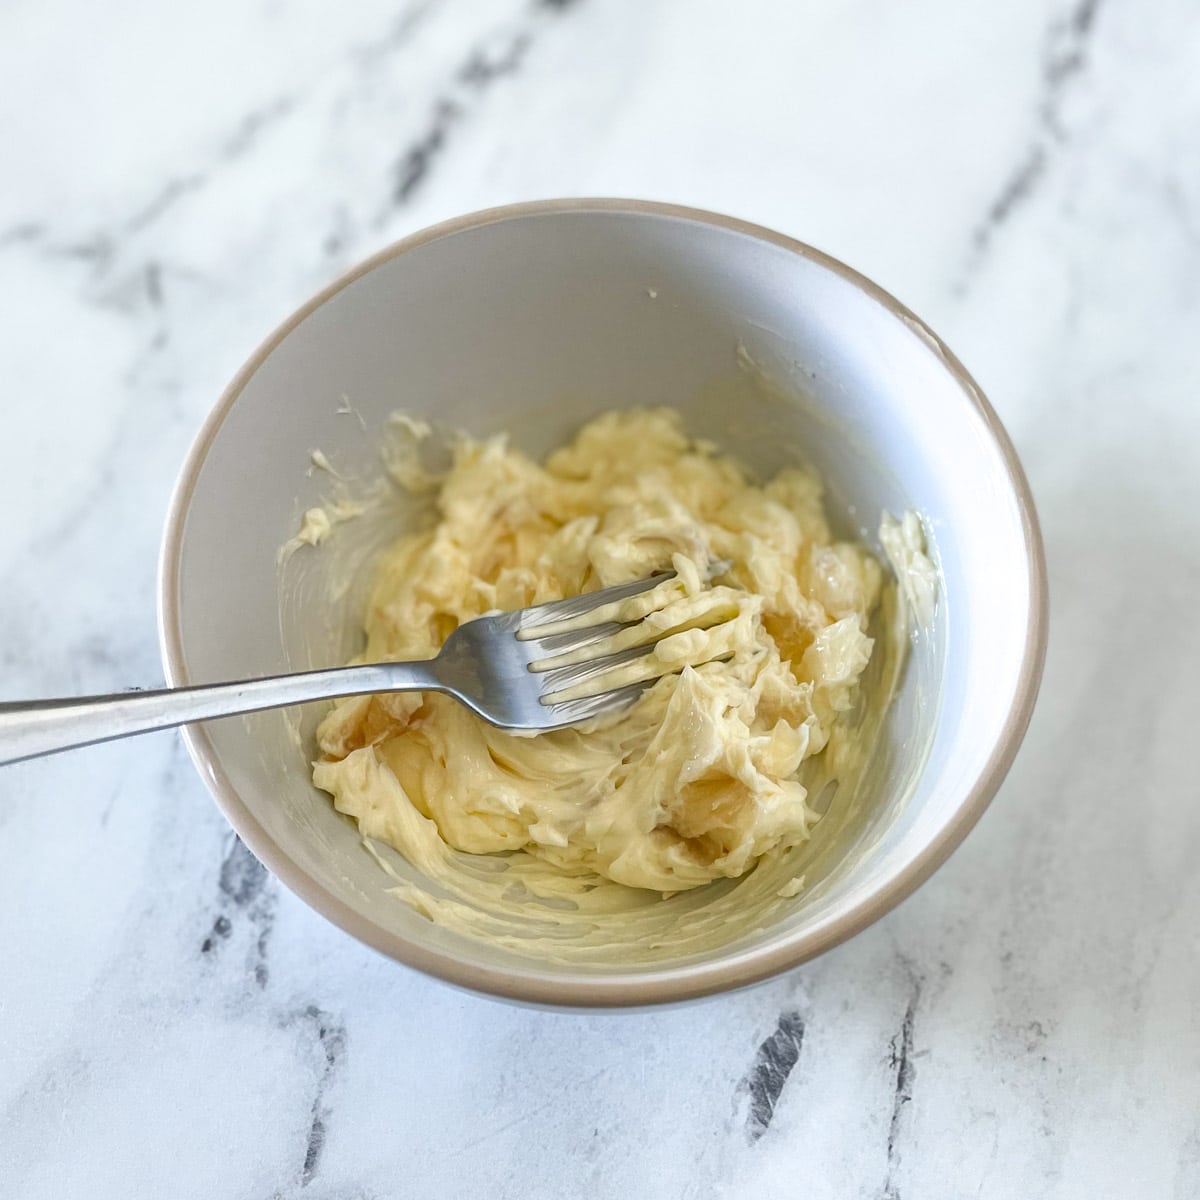 Roasted garlic is smashed into softened butter with a fork.